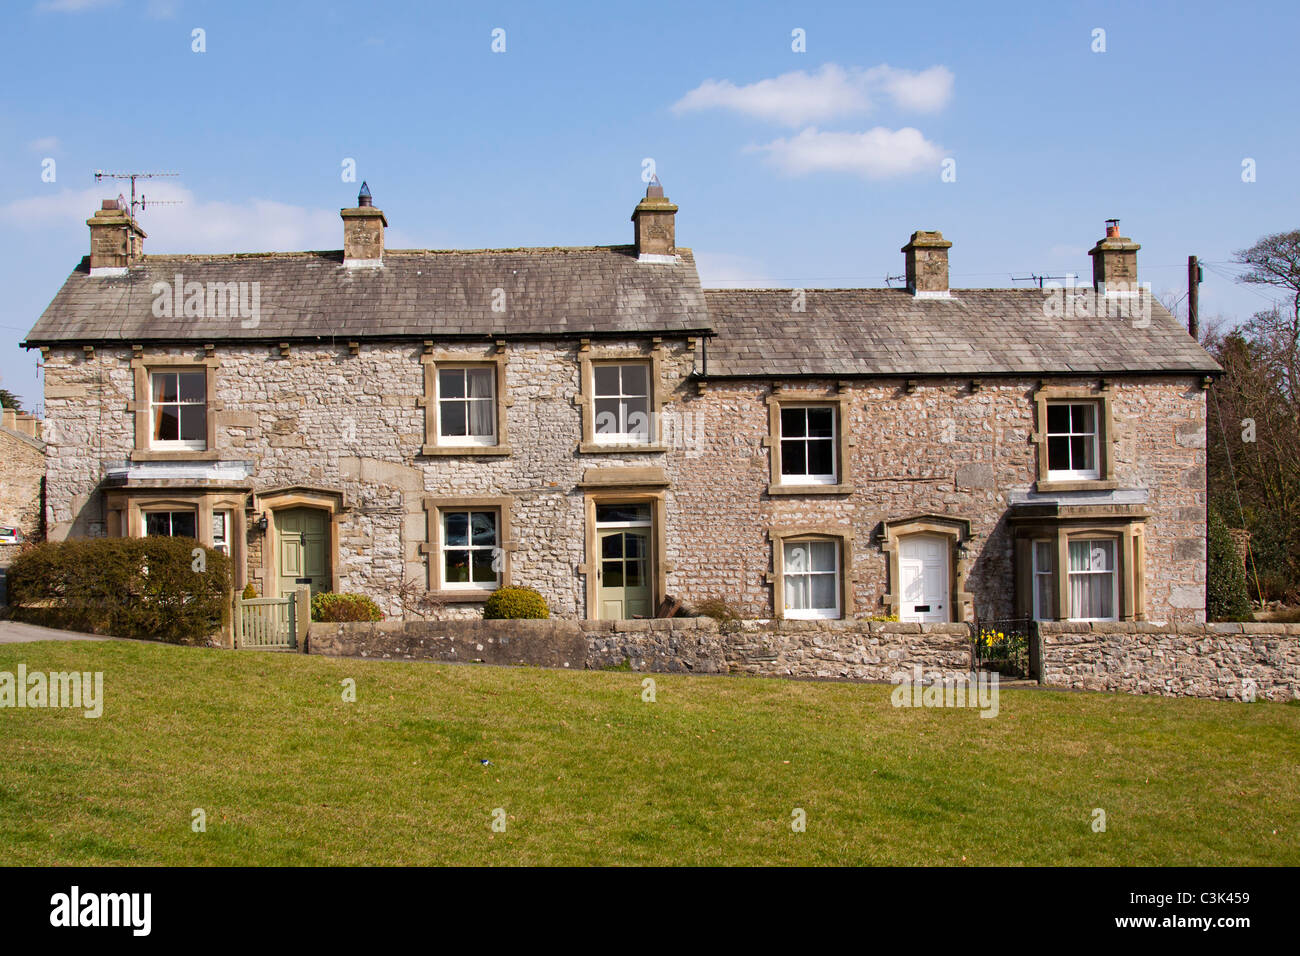 Houses in the village of Austwick, part of the Yorkshire Dales national park, England, UK Stock Photo